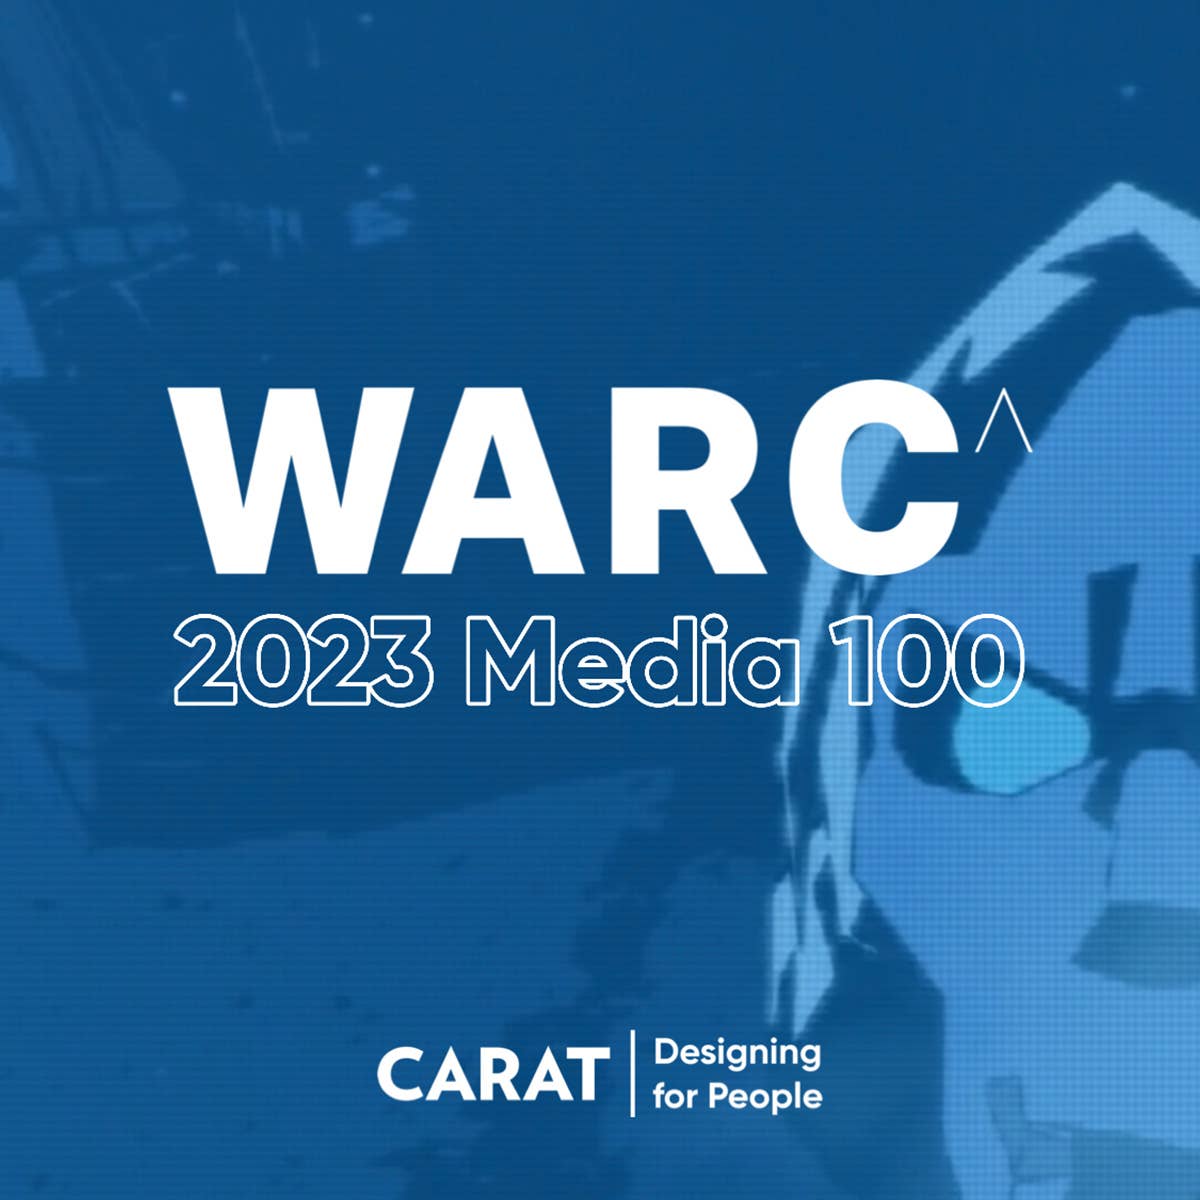 WARC Media 100 2023: The results are in